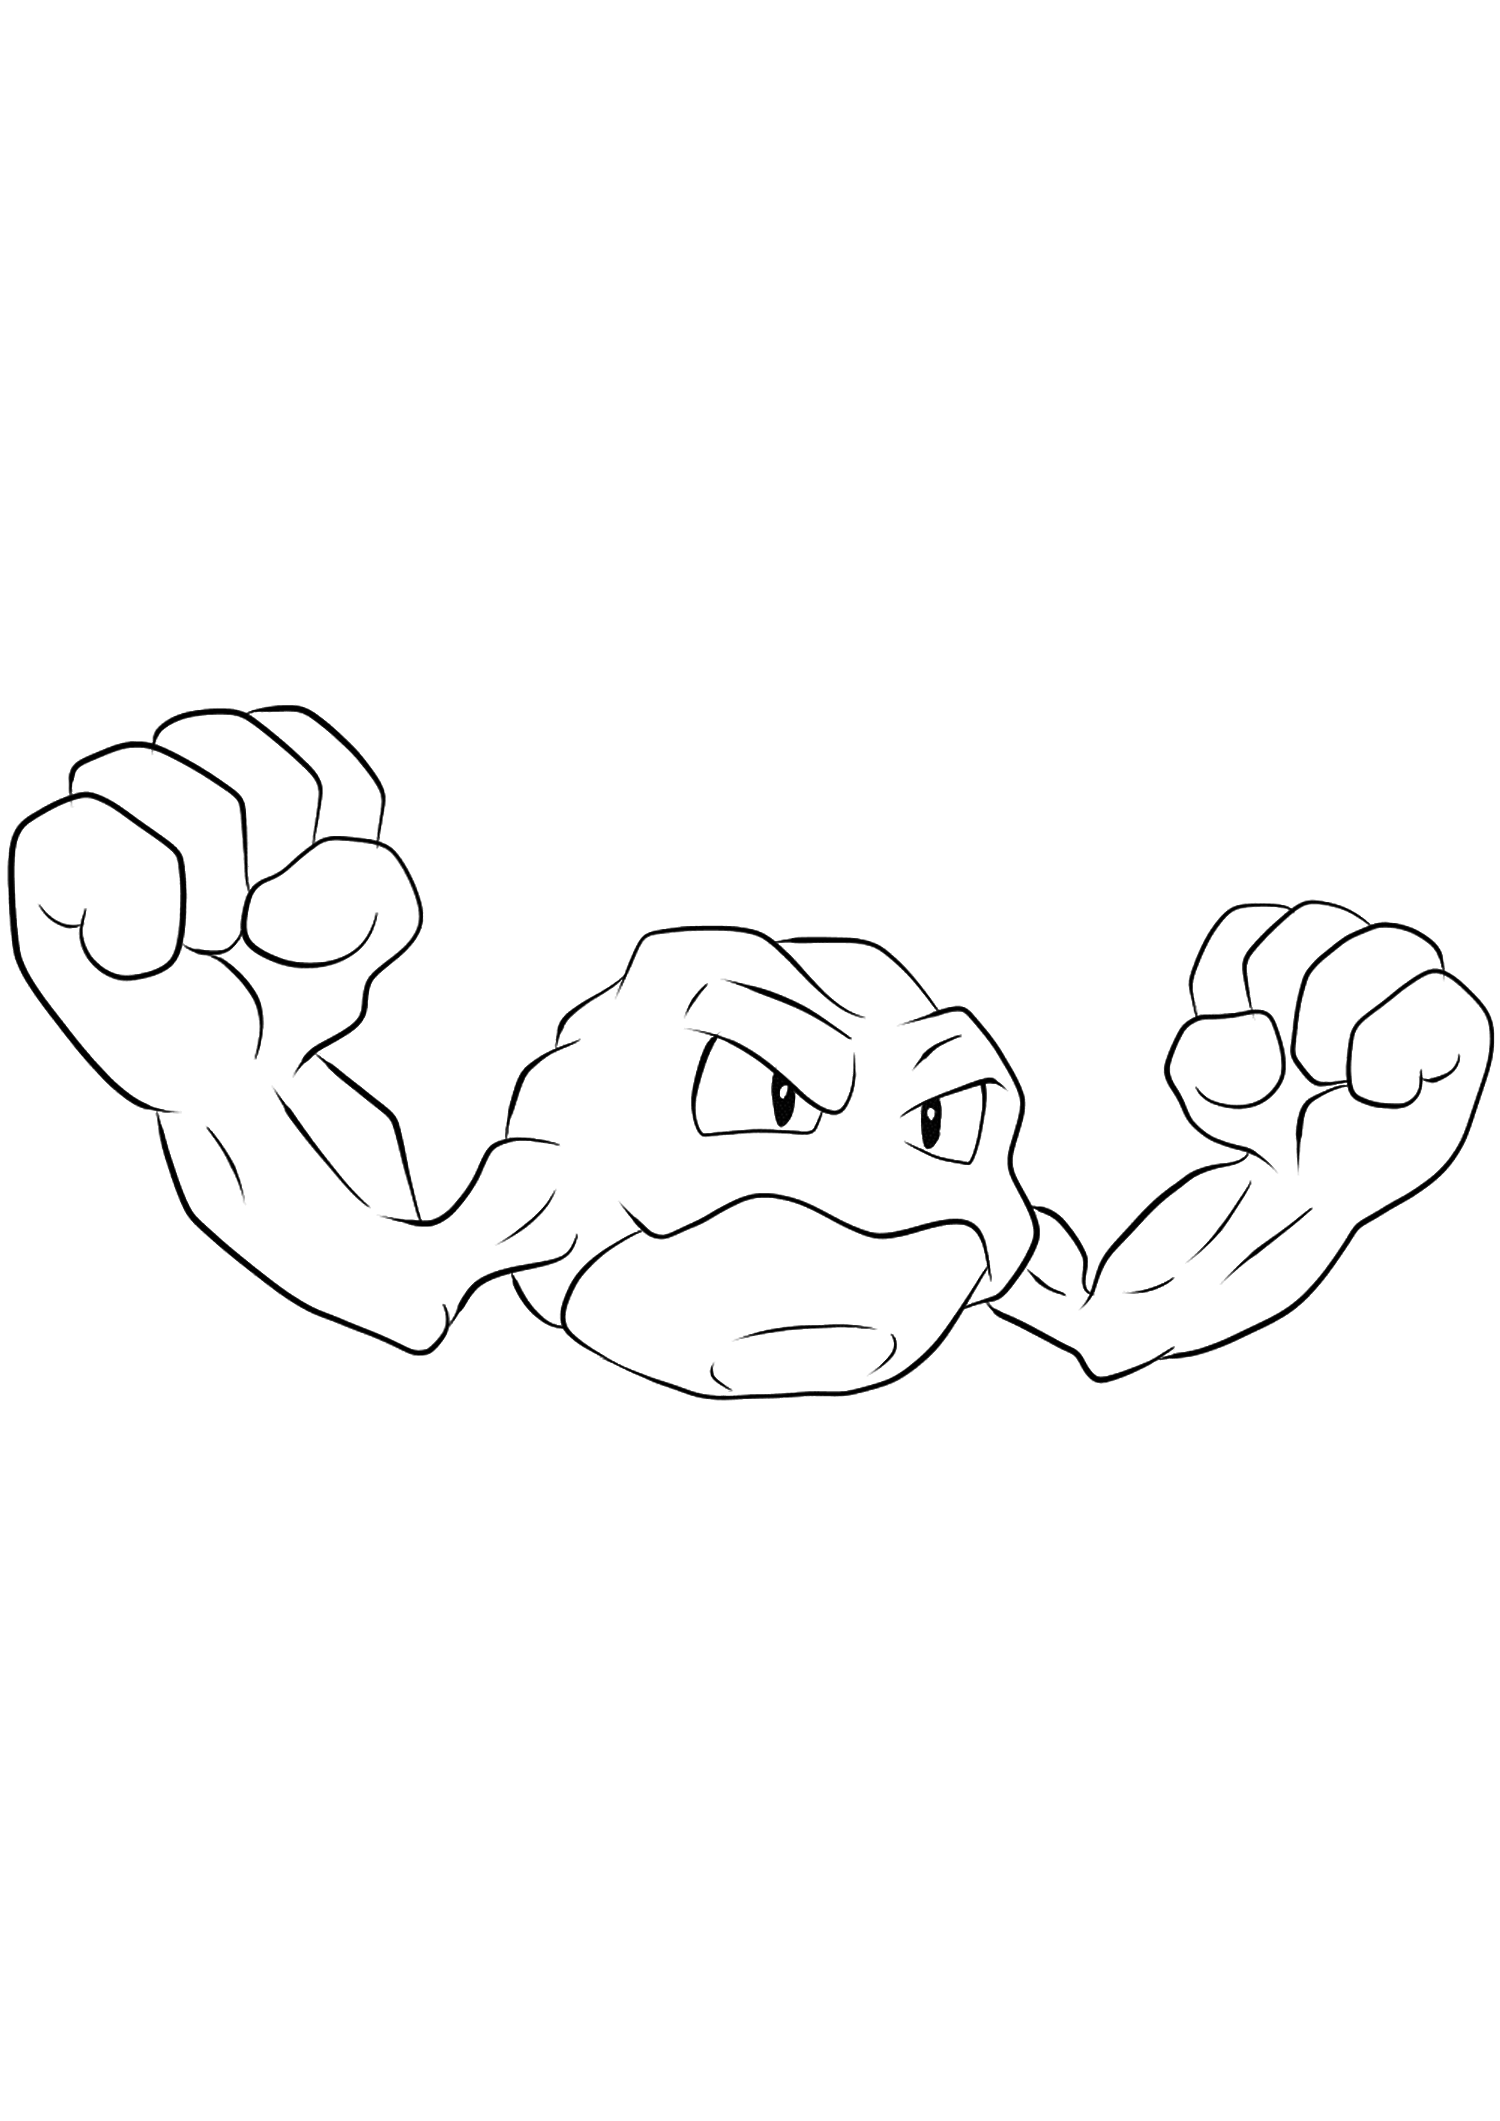 Geodude No 74 Pokemon Generation I All Pokemon Coloring Pages Kids Coloring Pages